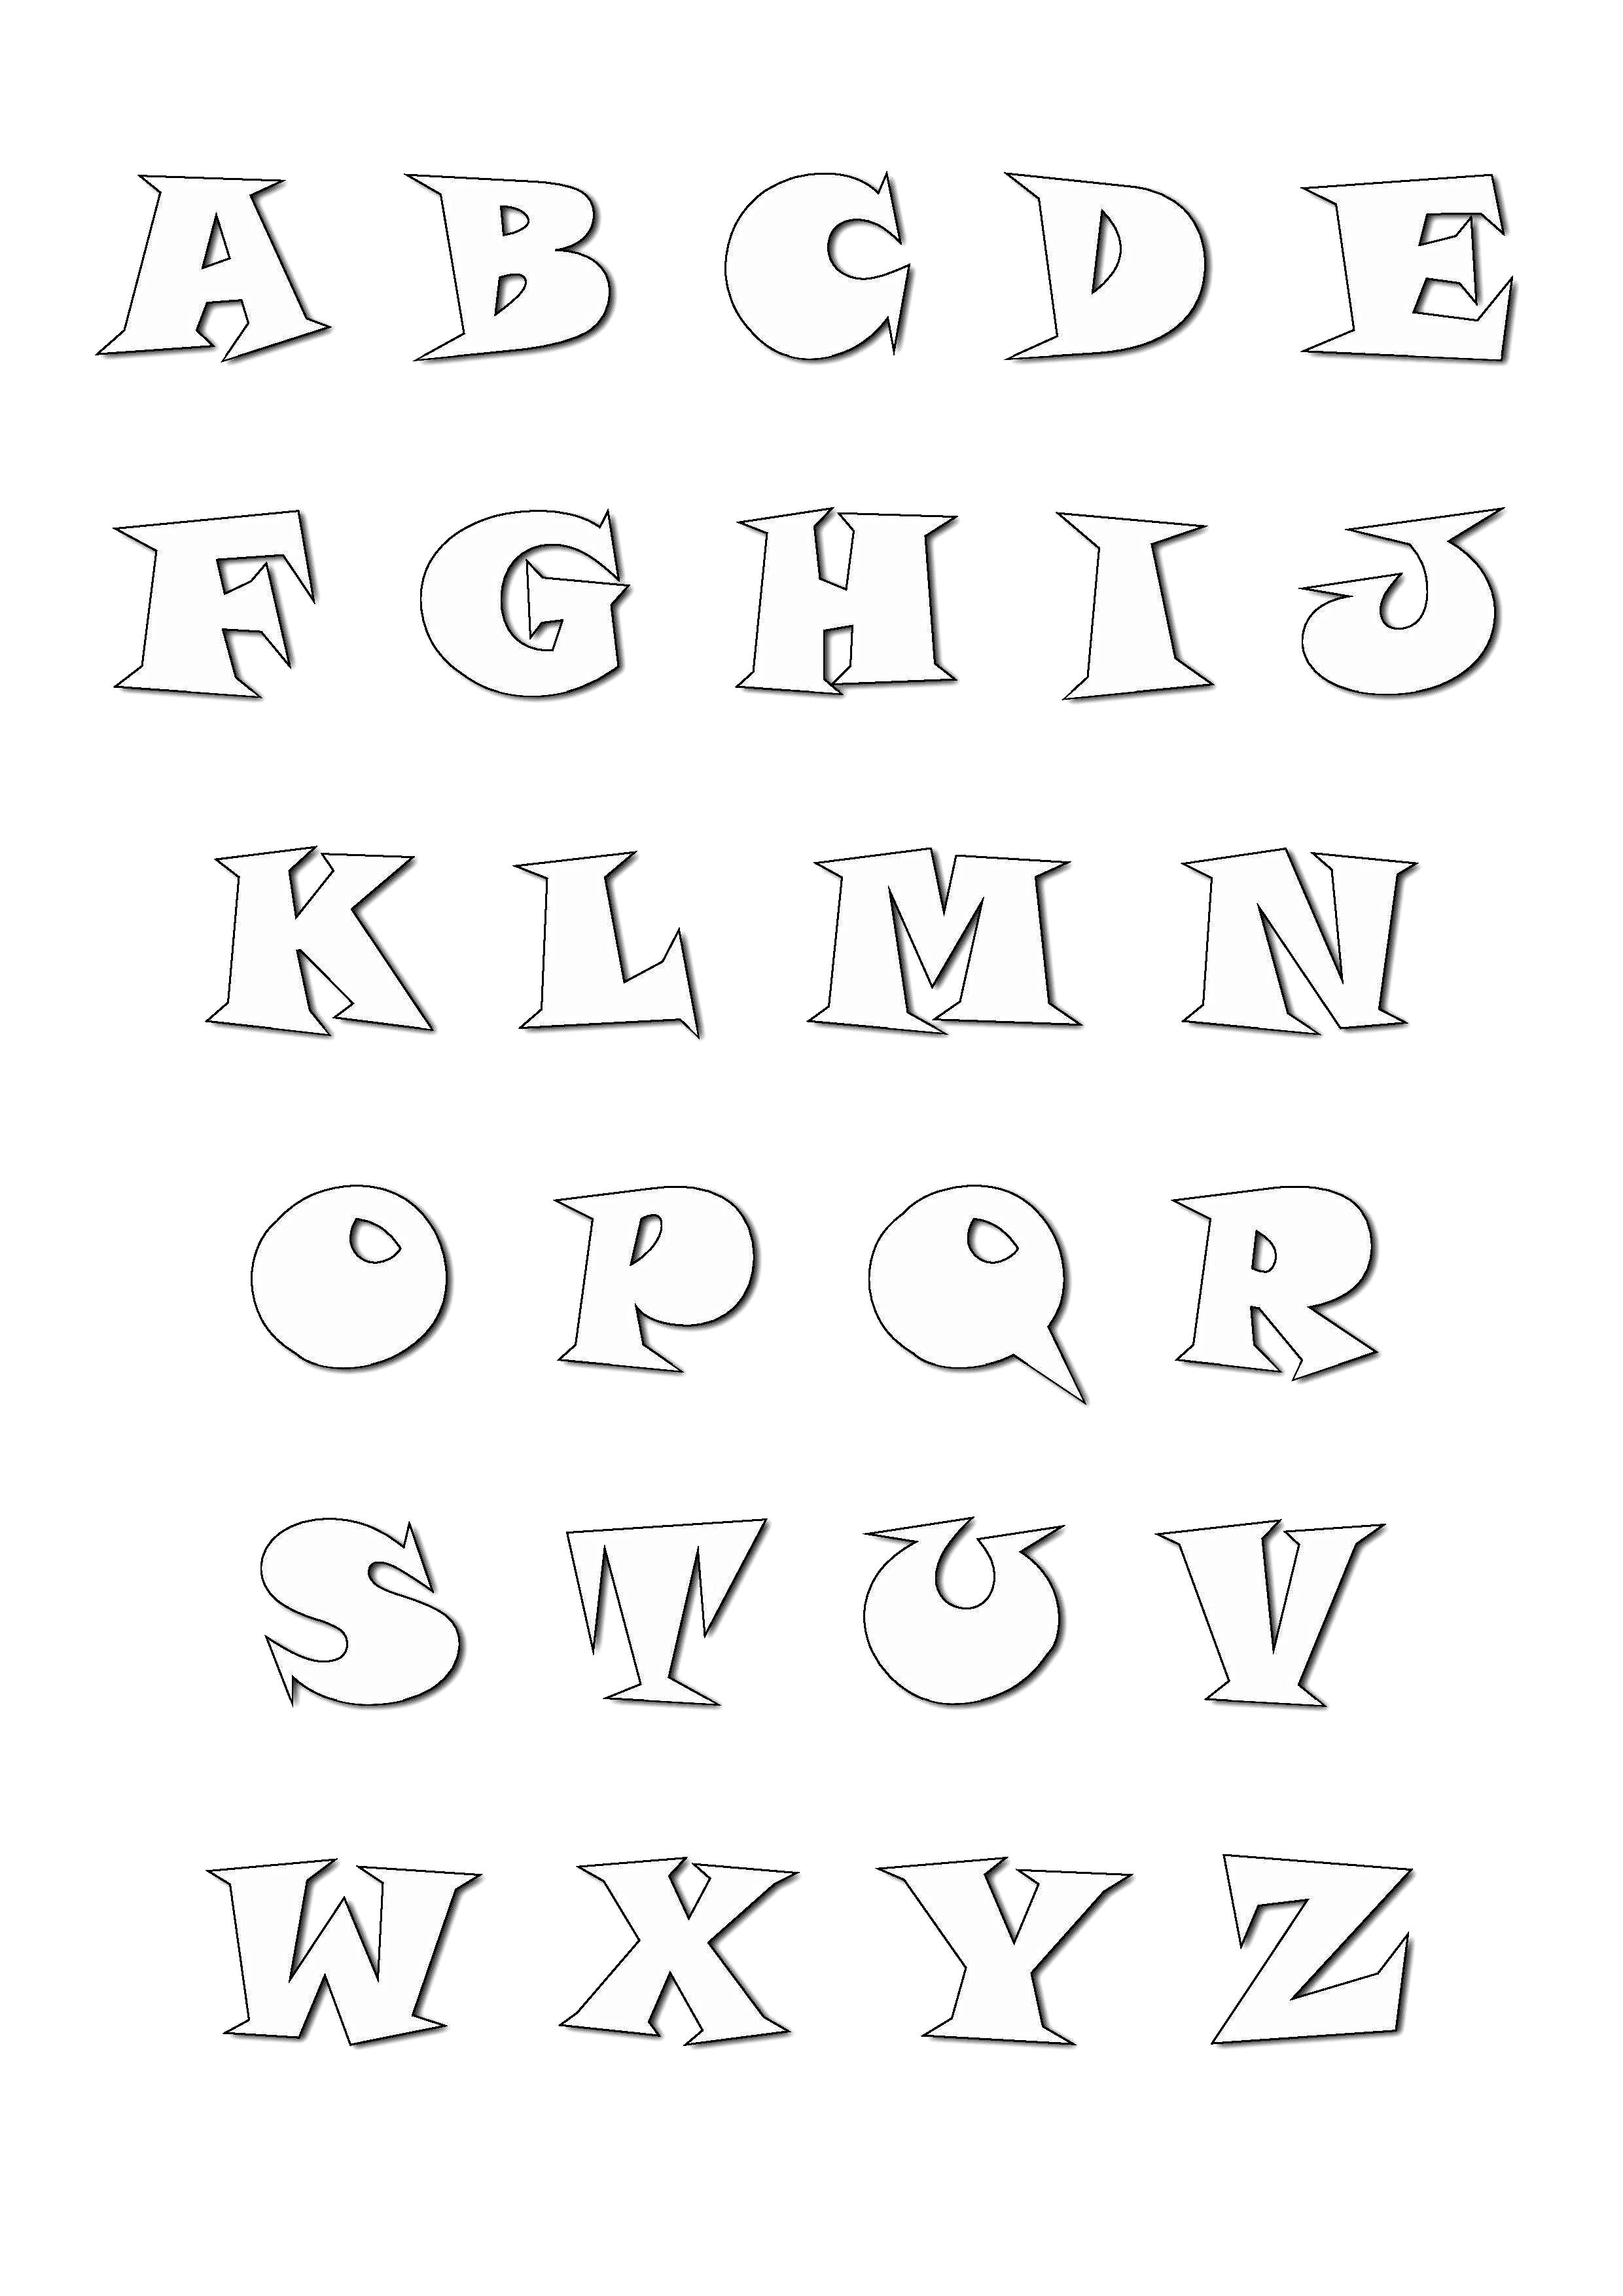 Alphabet coloring page to print and color for free : From A to Z (Cartoon font)